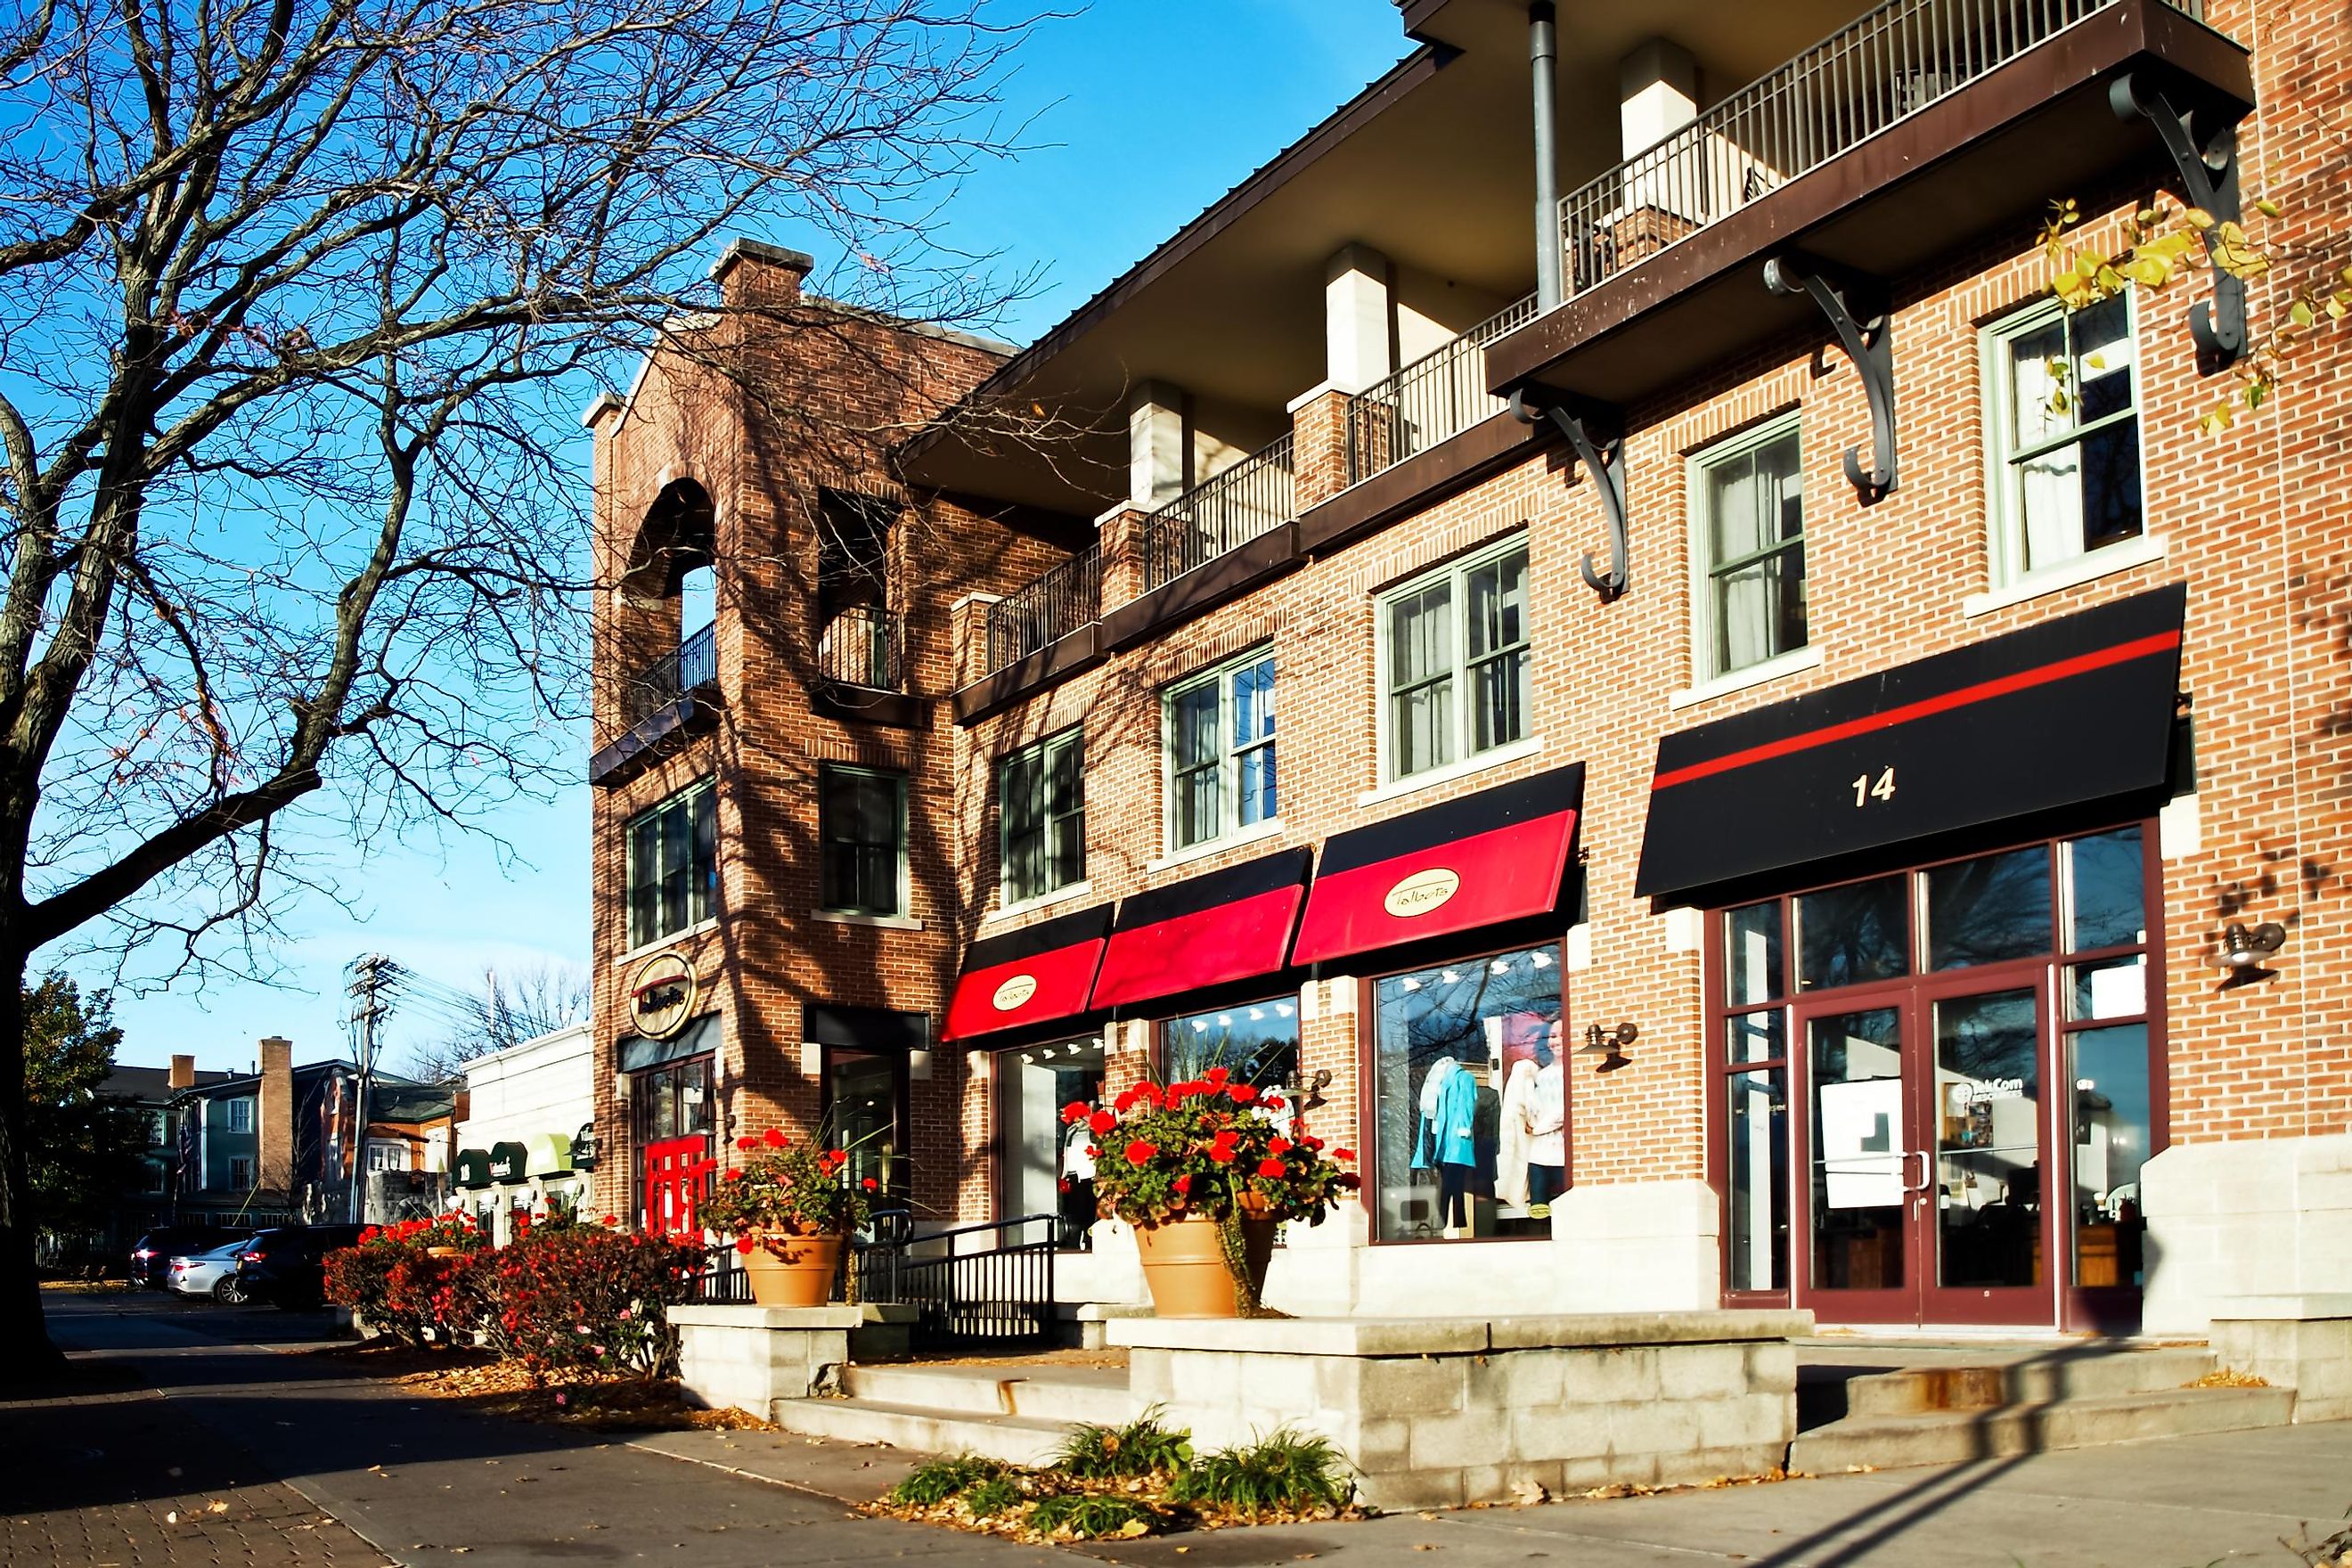 Charming shops and boutiques in Skaneateles, via DebraMillet / iStock.com